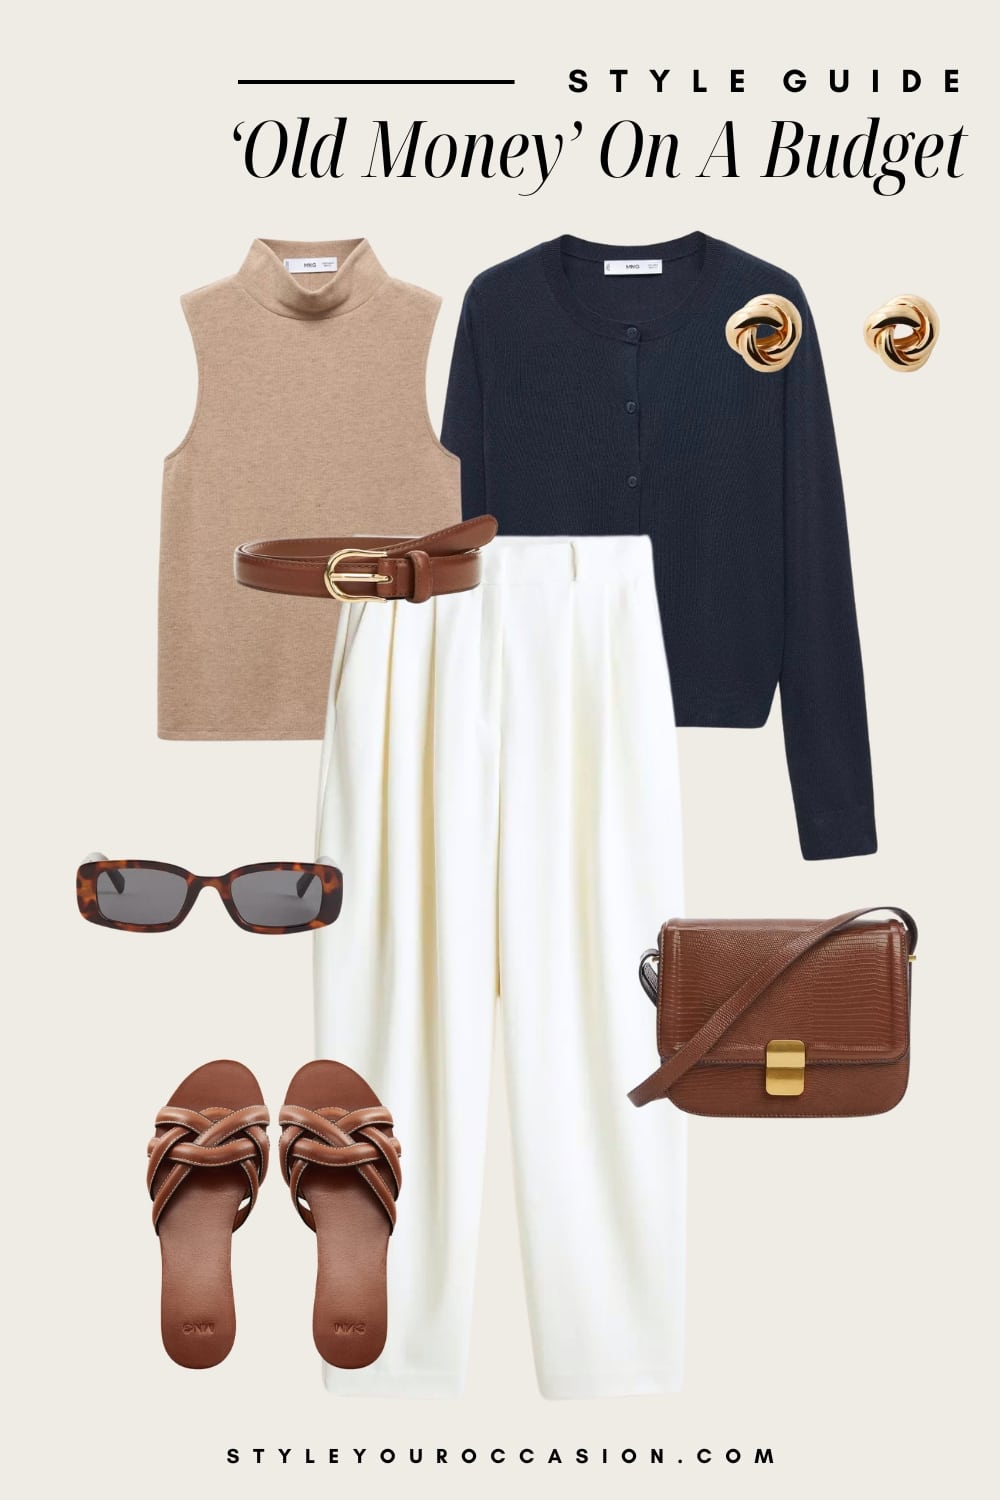 an image board of an old money outfit featuring white pleated trousers, a beige turtleneck tank, a navy cardigan, cognac leather sandals, and leather and gold accessories